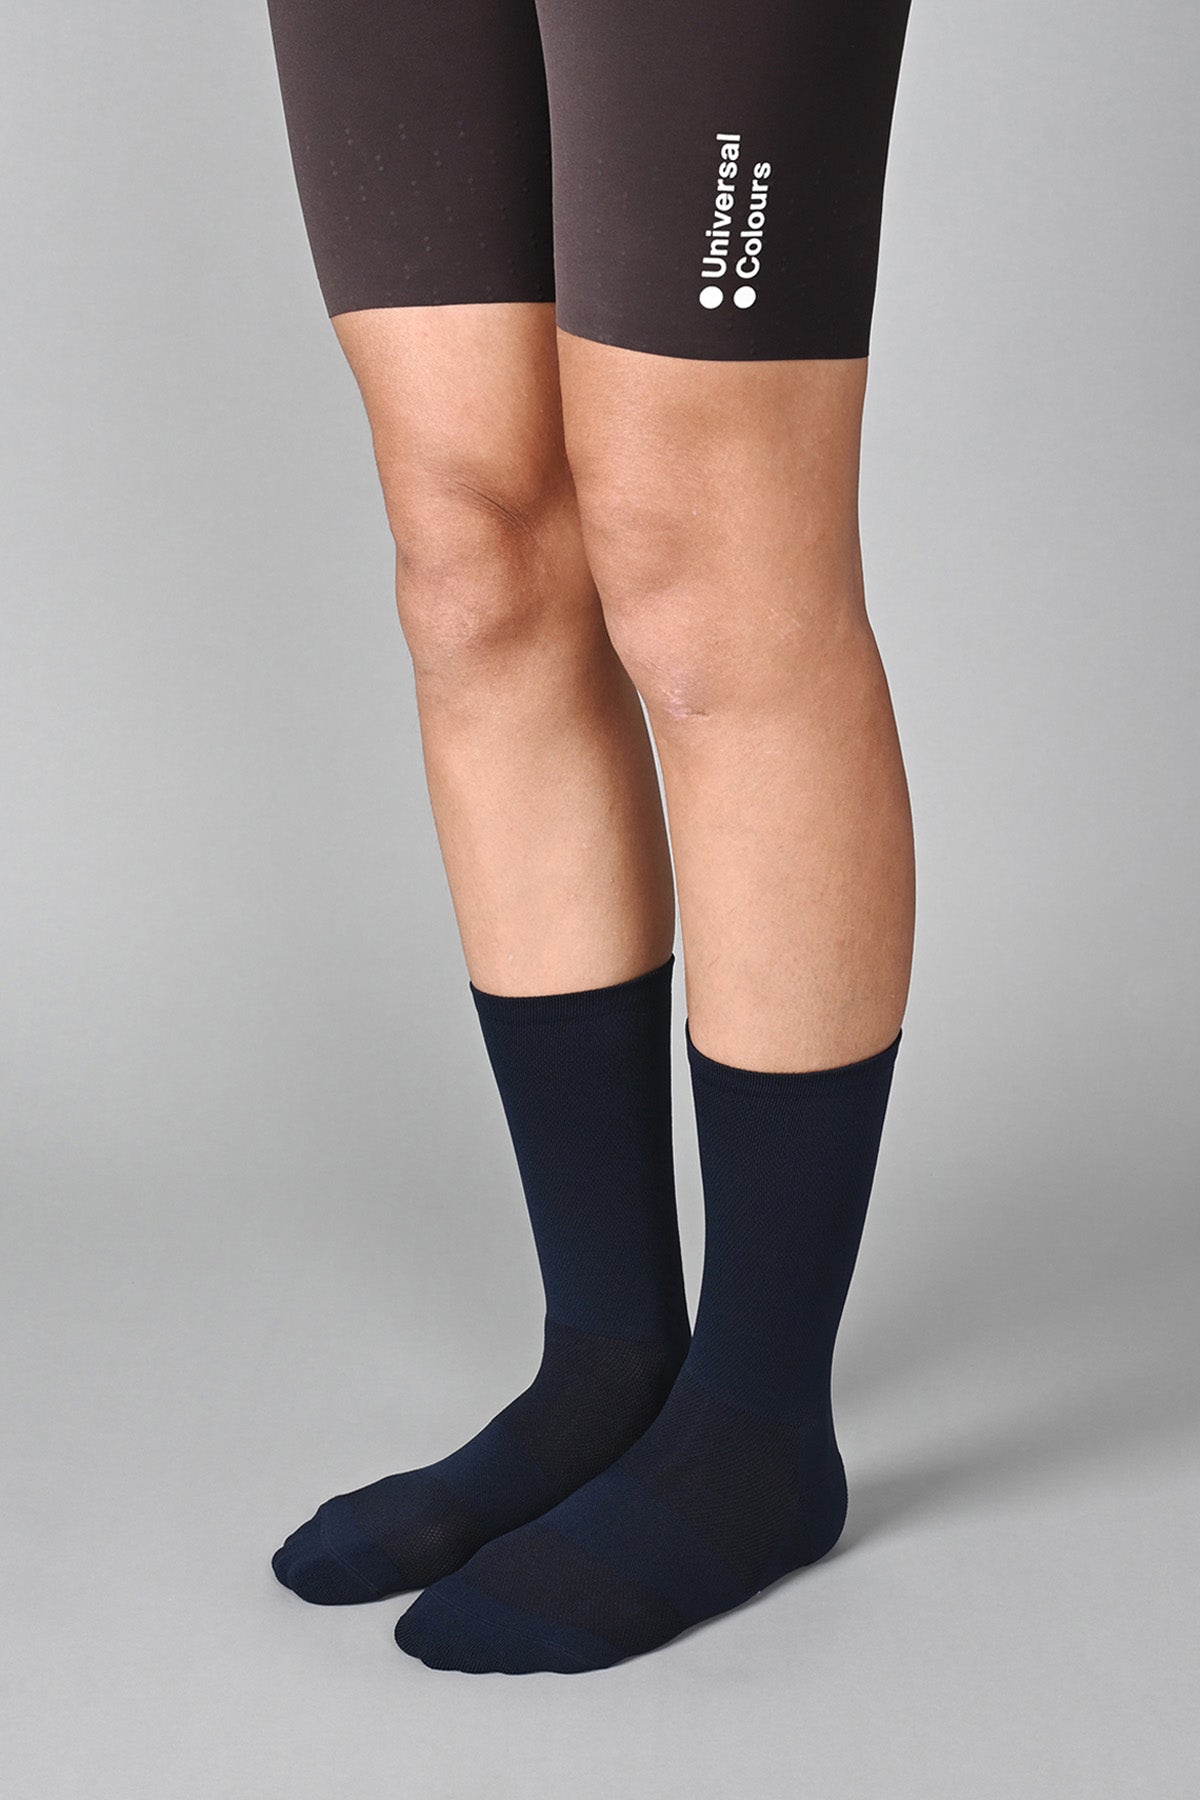 STEALTH - NAVY FRONT SIDE | BEST CYCLING SOCKS